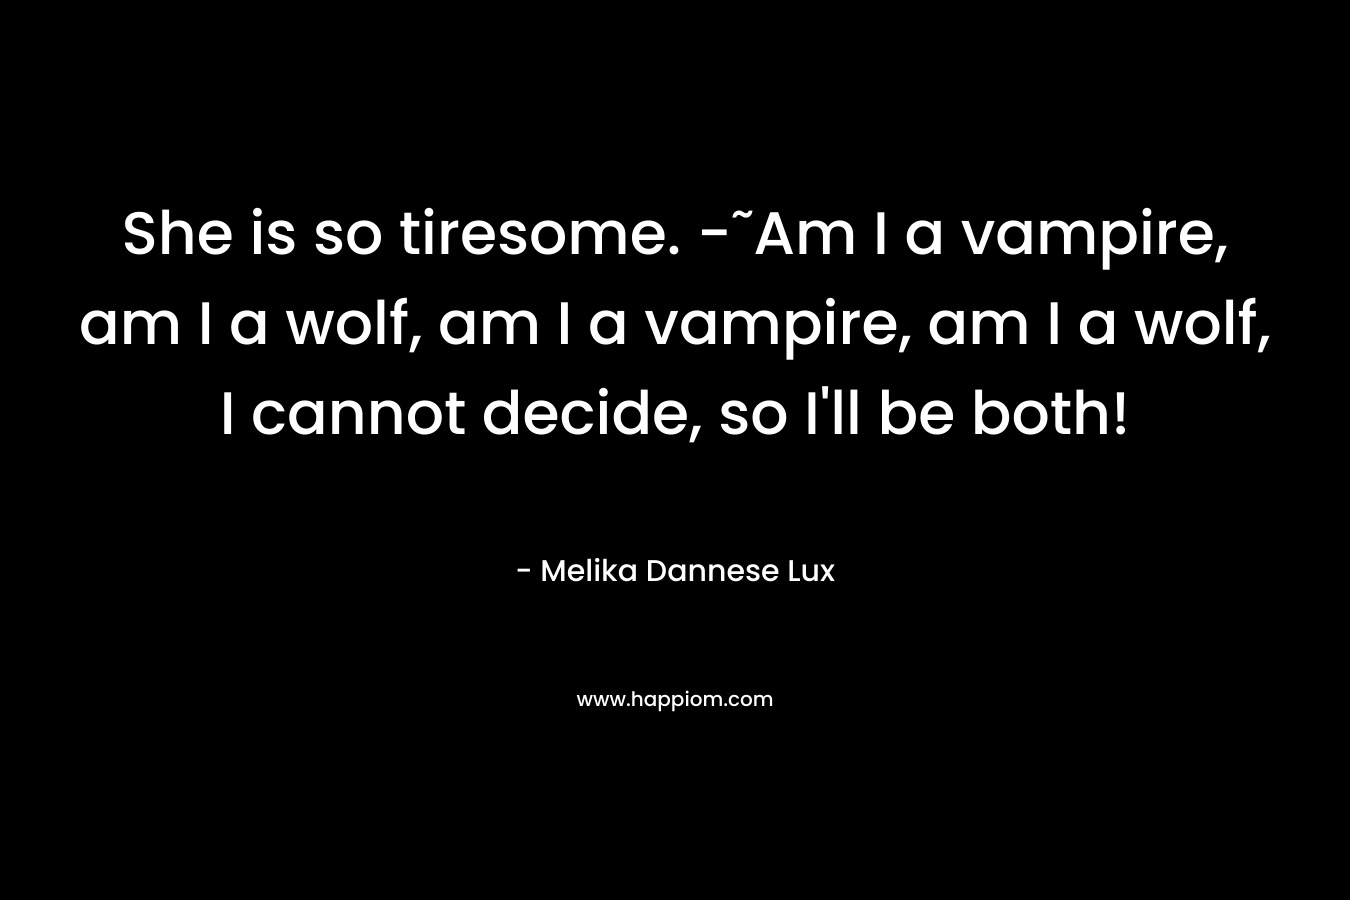 She is so tiresome. -˜Am I a vampire, am I a wolf, am I a vampire, am I a wolf, I cannot decide, so I'll be both!